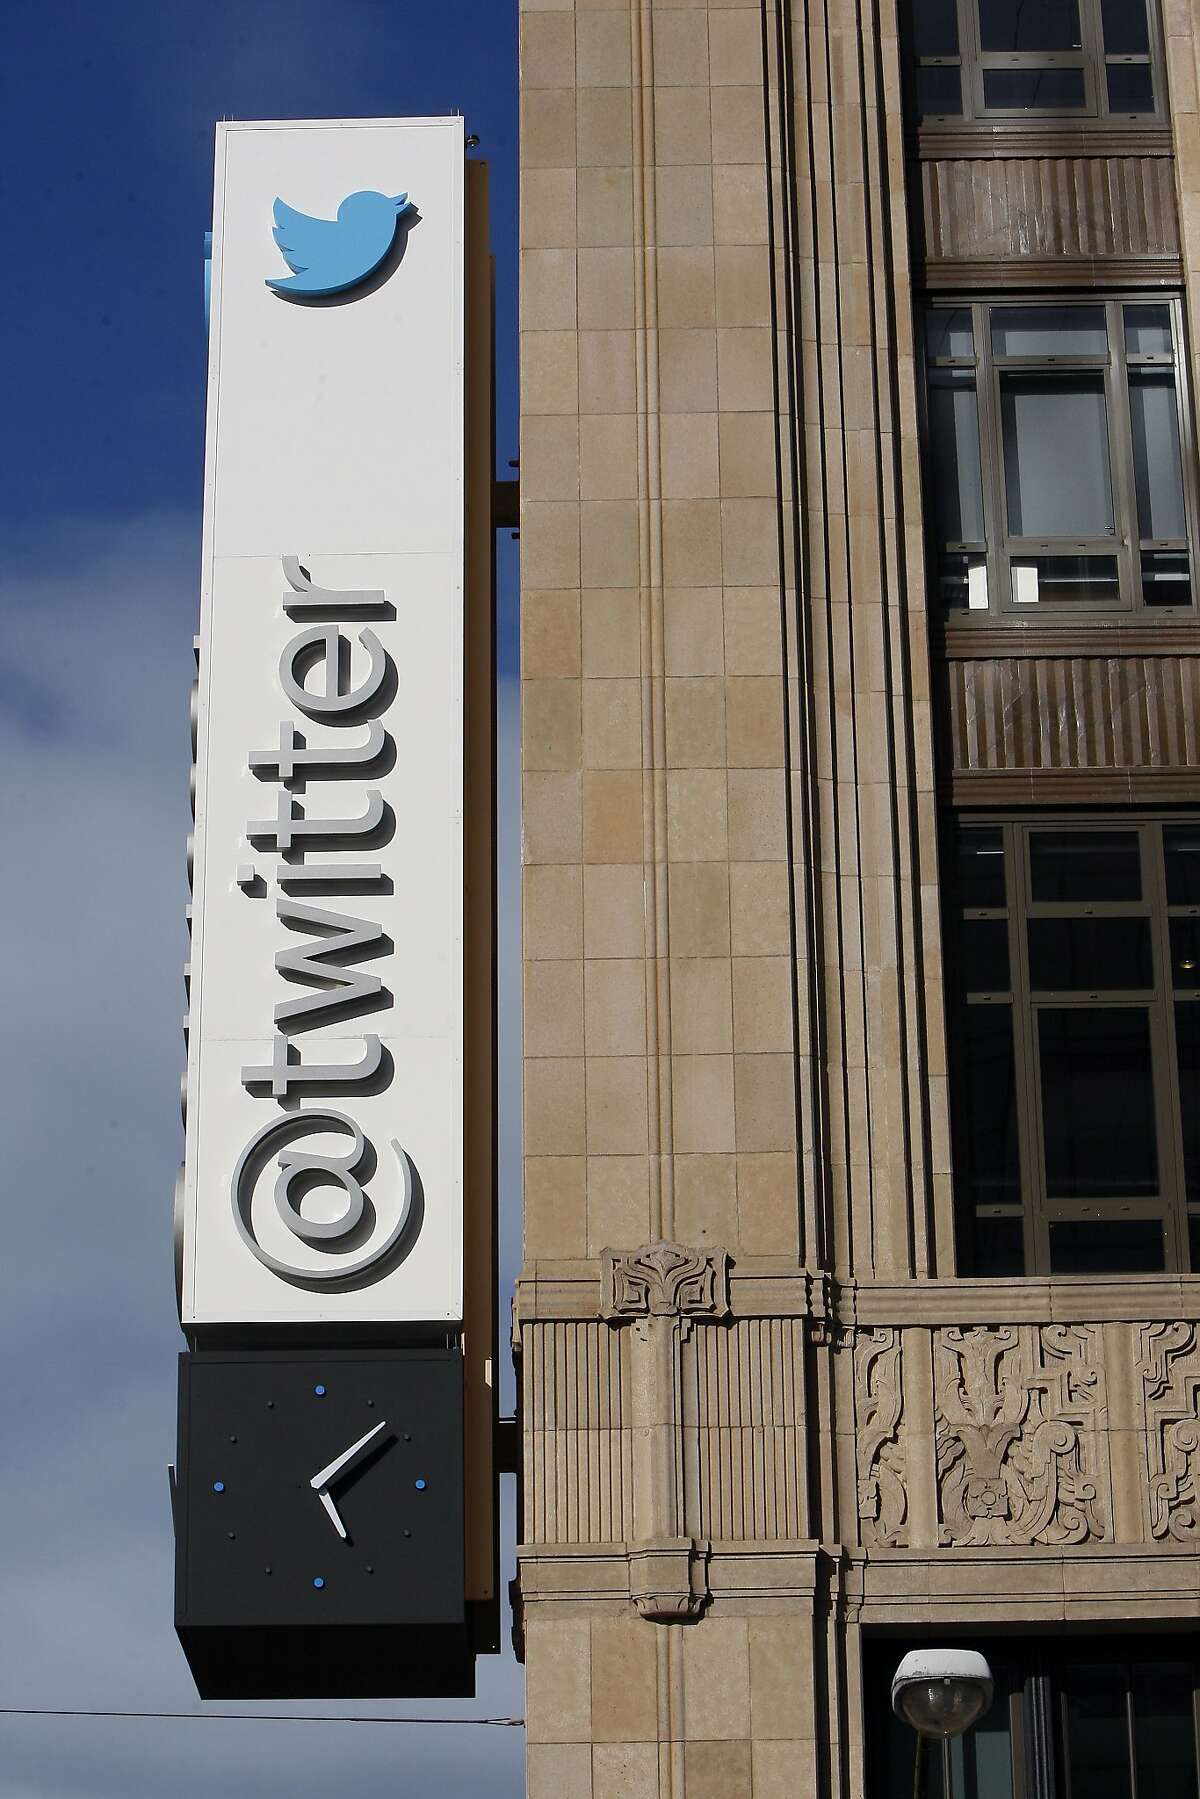 Twitter's sign hangs on the front of their headquarters on Market Street in San Francisco. A twitter account associated with ISIS issued threats calling for the assassination of Twitter employees in San Francisco.